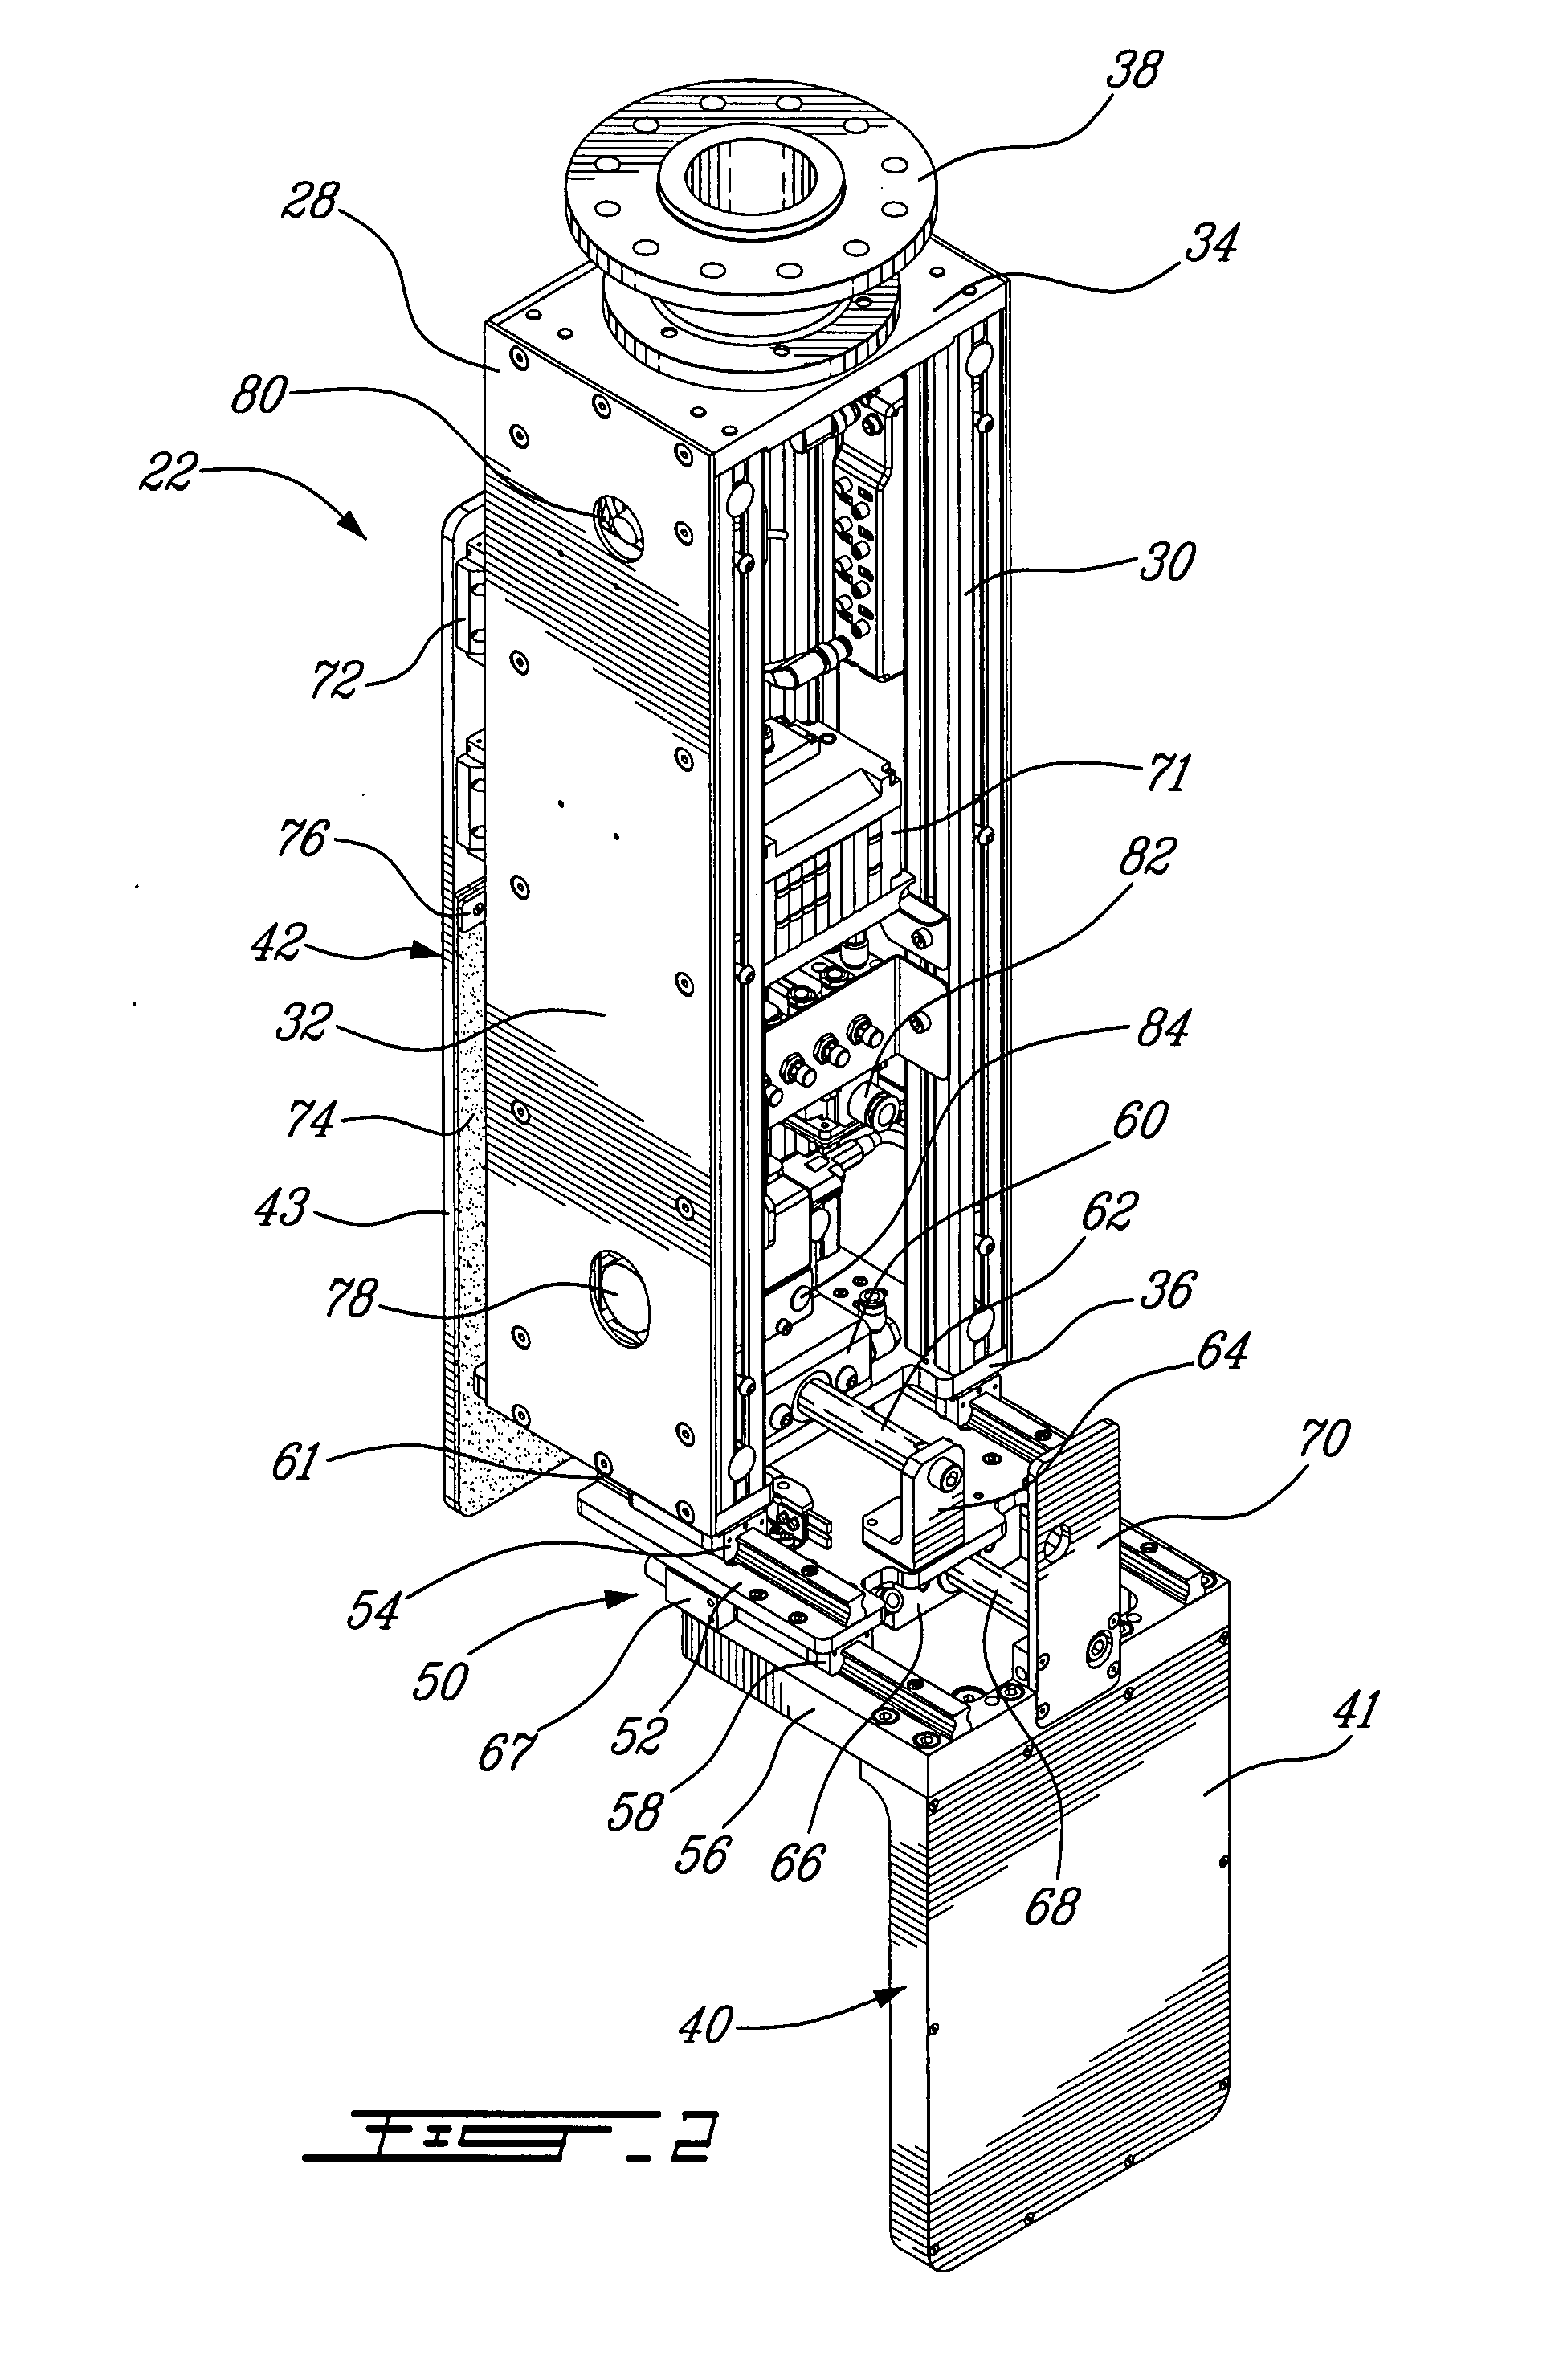 Tool and method for mixed palletizing/depalletizing